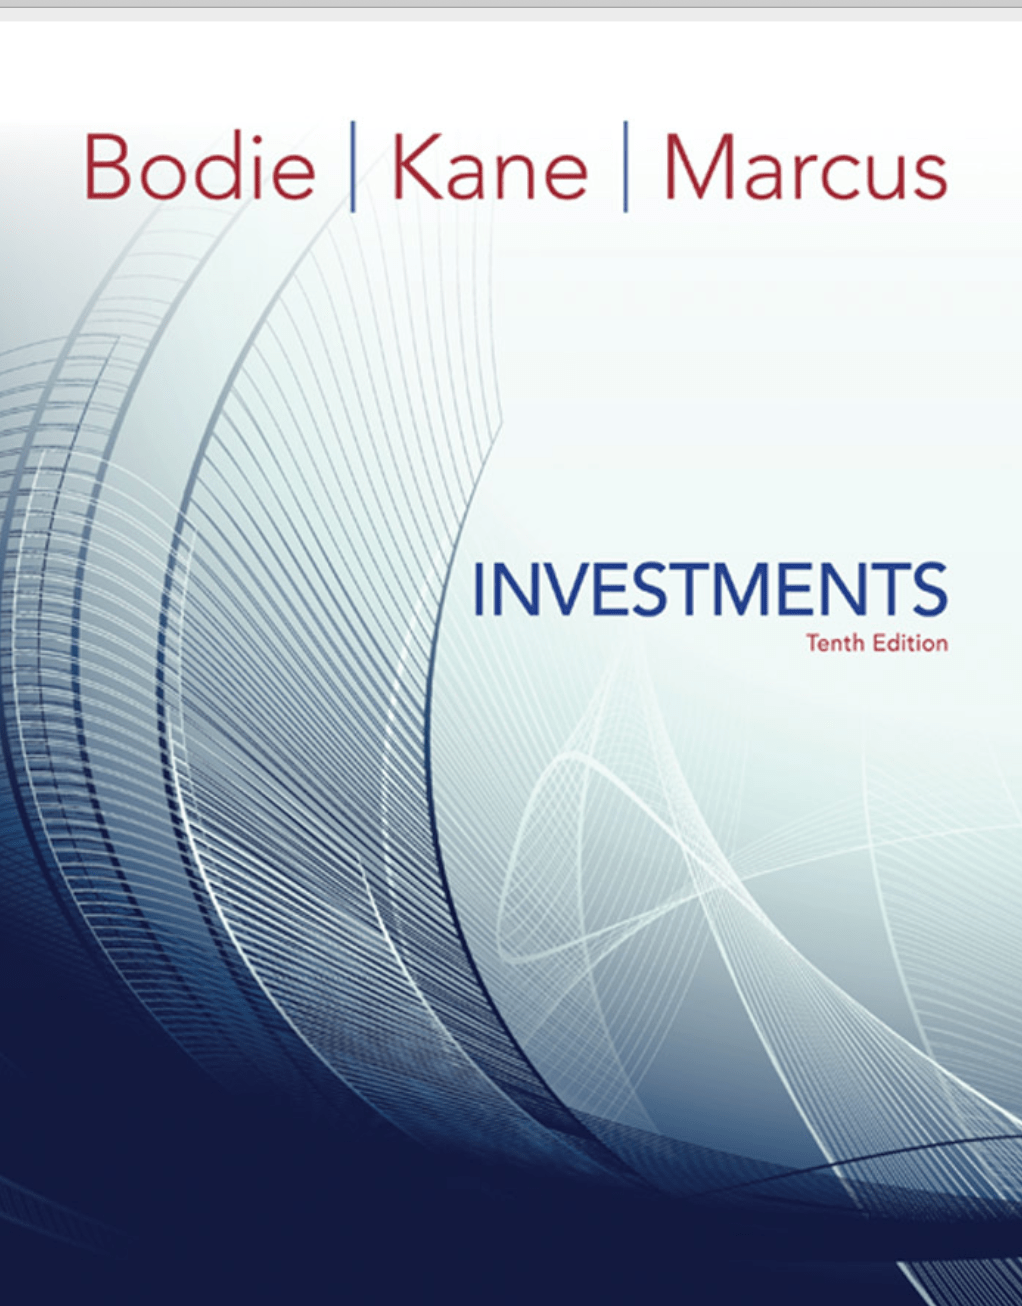 Investments, 10th EDITION read online at BusinessBooks.cc